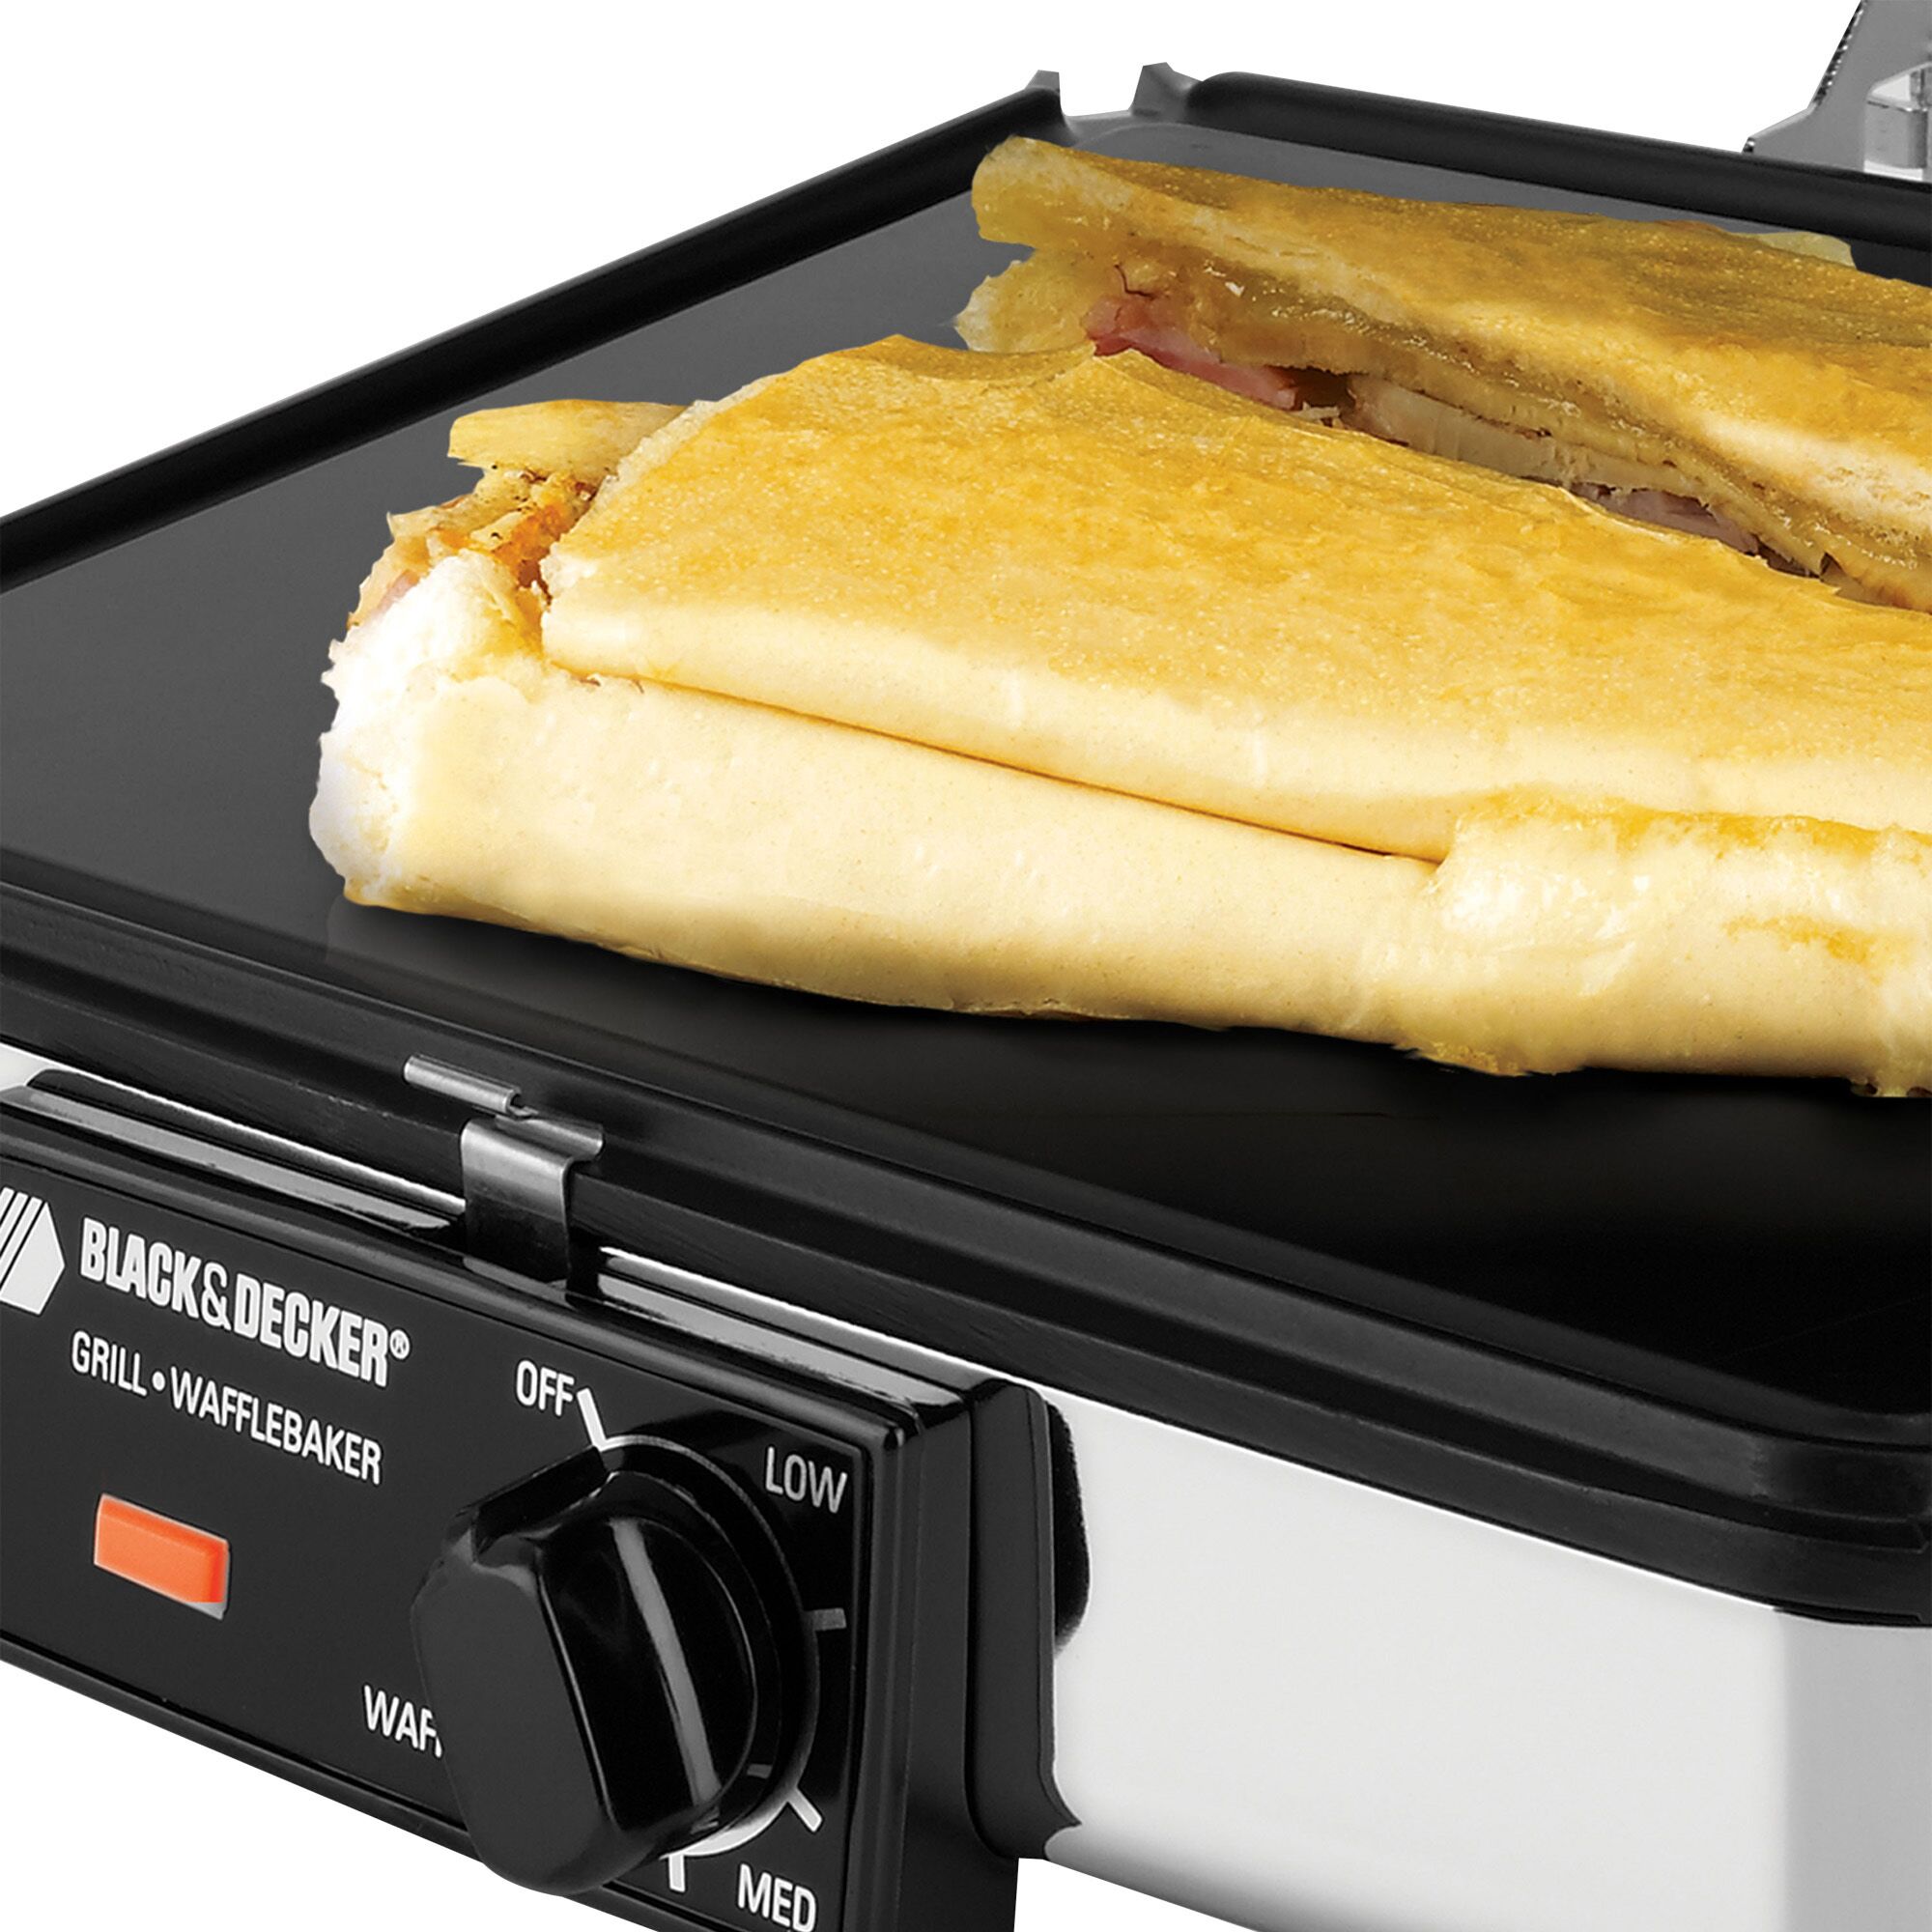 3 in 1 Grill Griddle Waffle Maker.